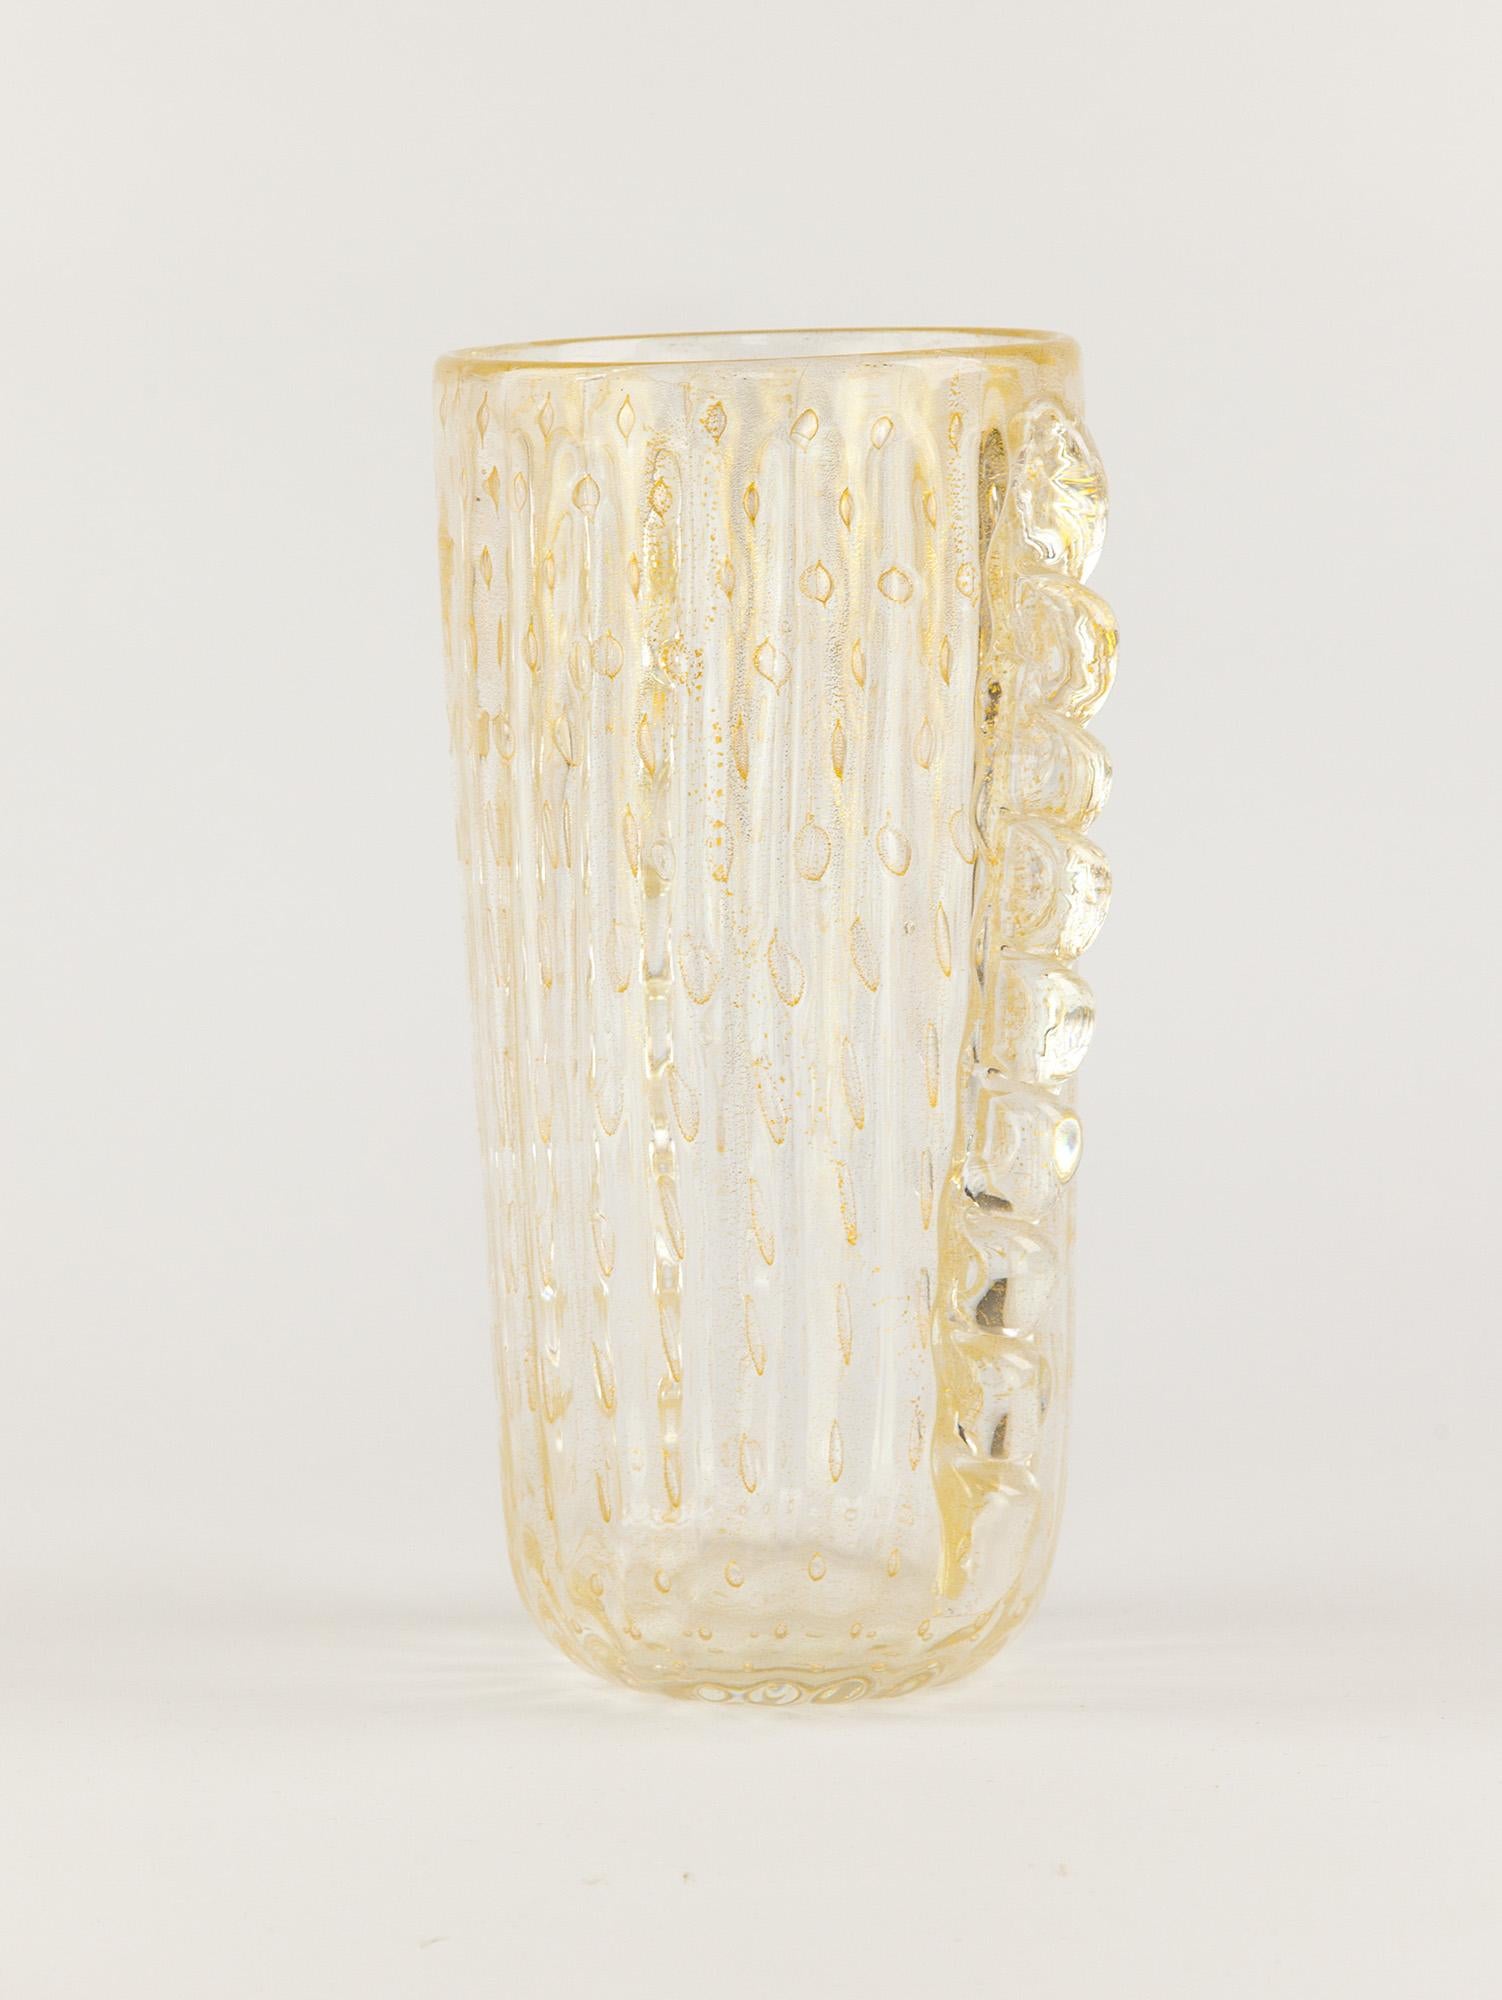 Original and rare vintage Murano vase by Toso Murano. The ribbed crystal clear glass with gold flecks is dotted with ‘Bullicante’ bubbles. The 'Morise' ribbed decorations have gold flecks inclusions giving the glass a golden hue. Made in Italy,